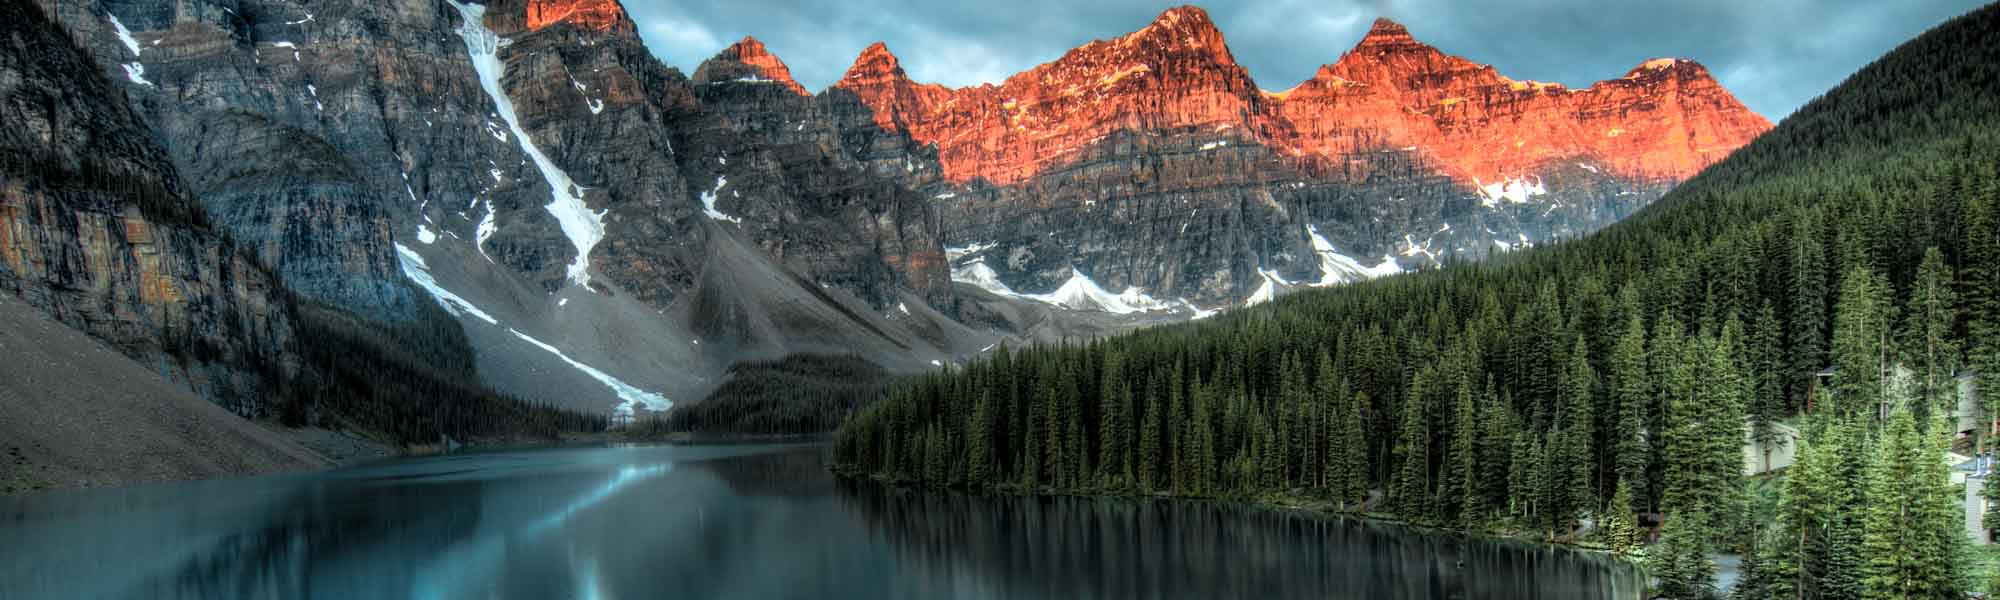 The Canadian Rocky Mountains | Adventures.com